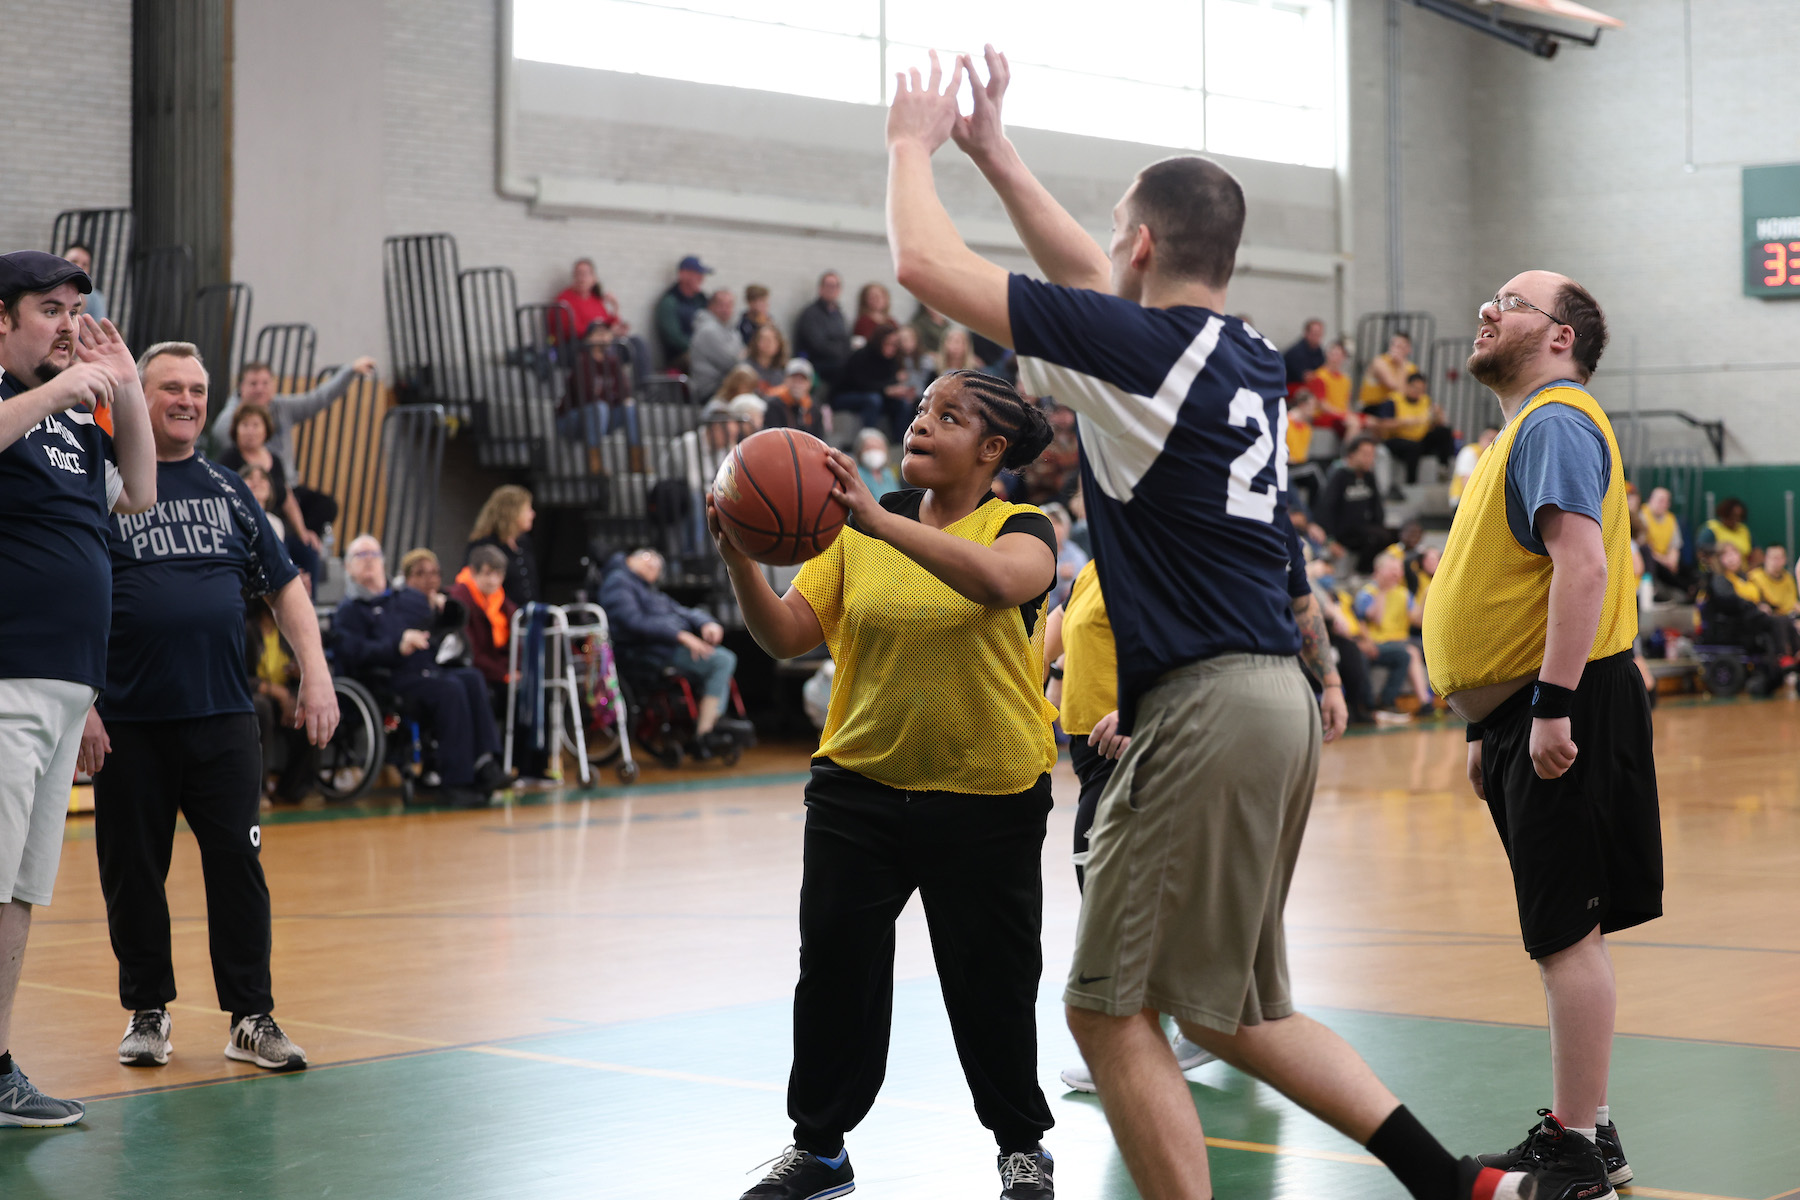 Special Olympics basketball